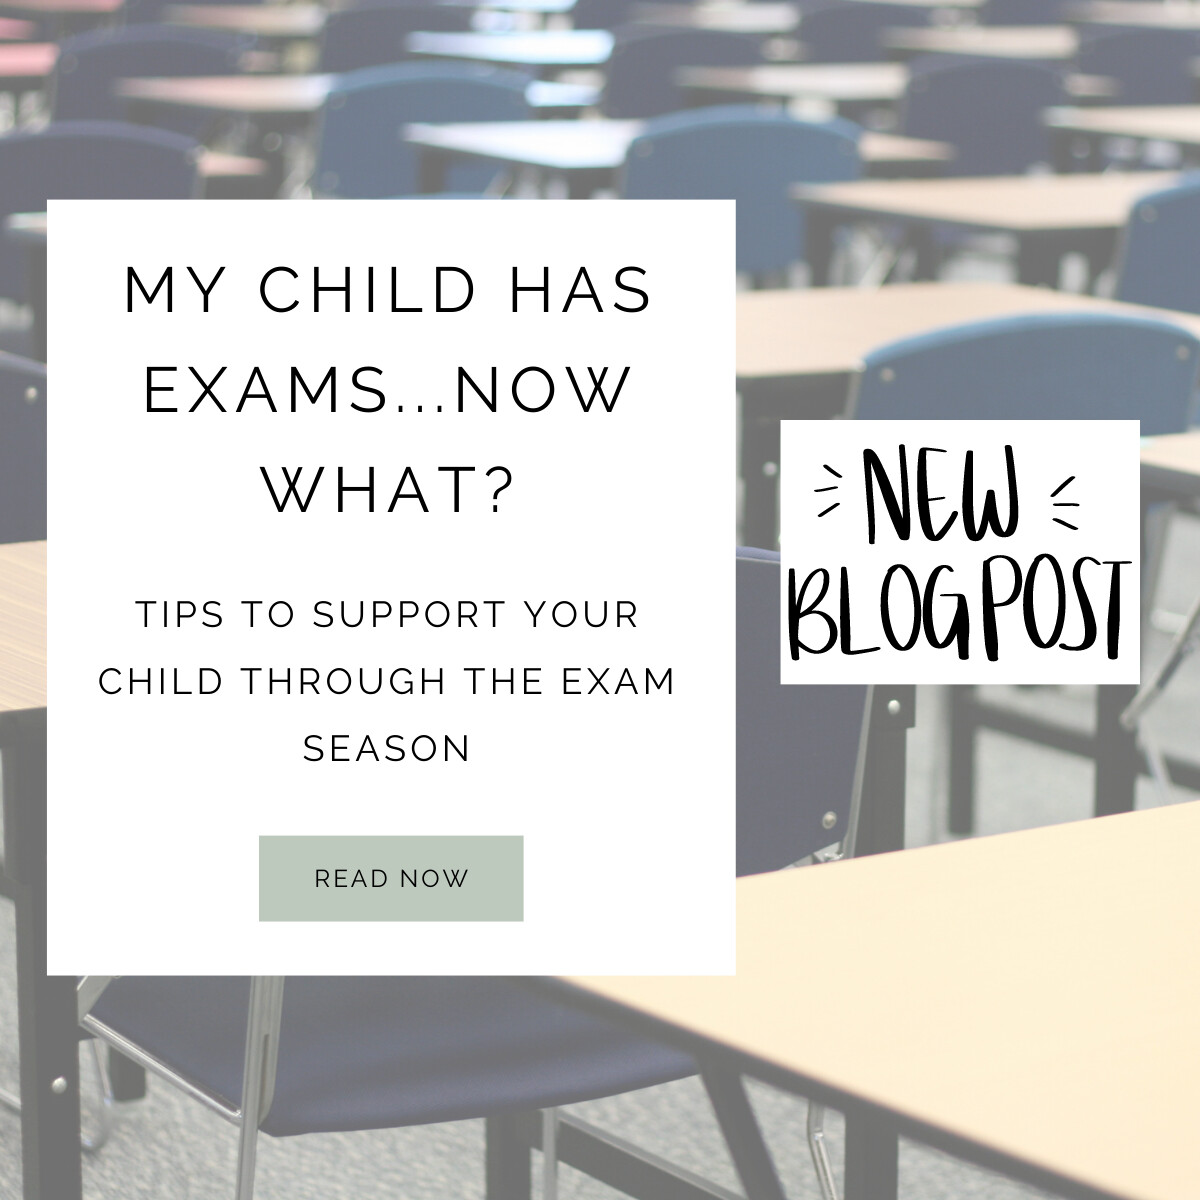 My child has exams...now what?